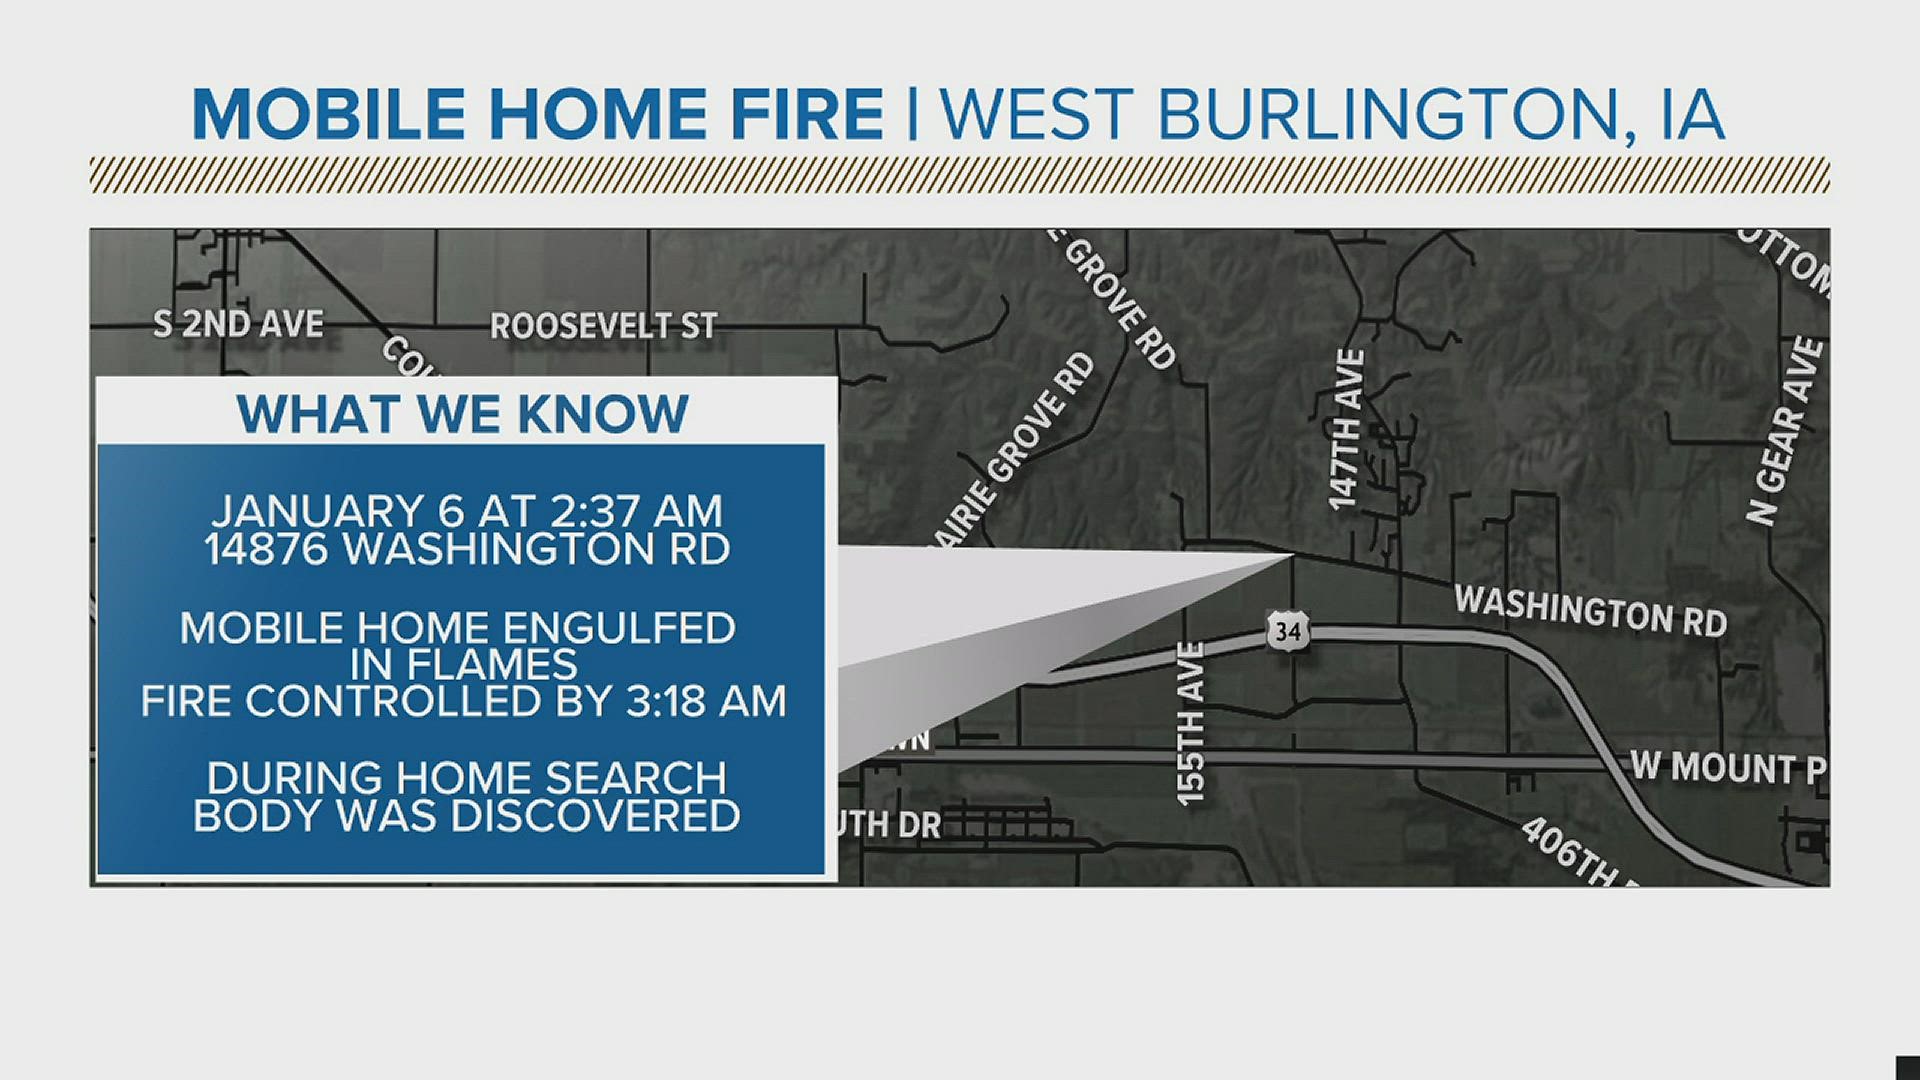 The fire was reported early Thursday morning on Washington Road in rural West Burlington. A body was found during a search of the home.